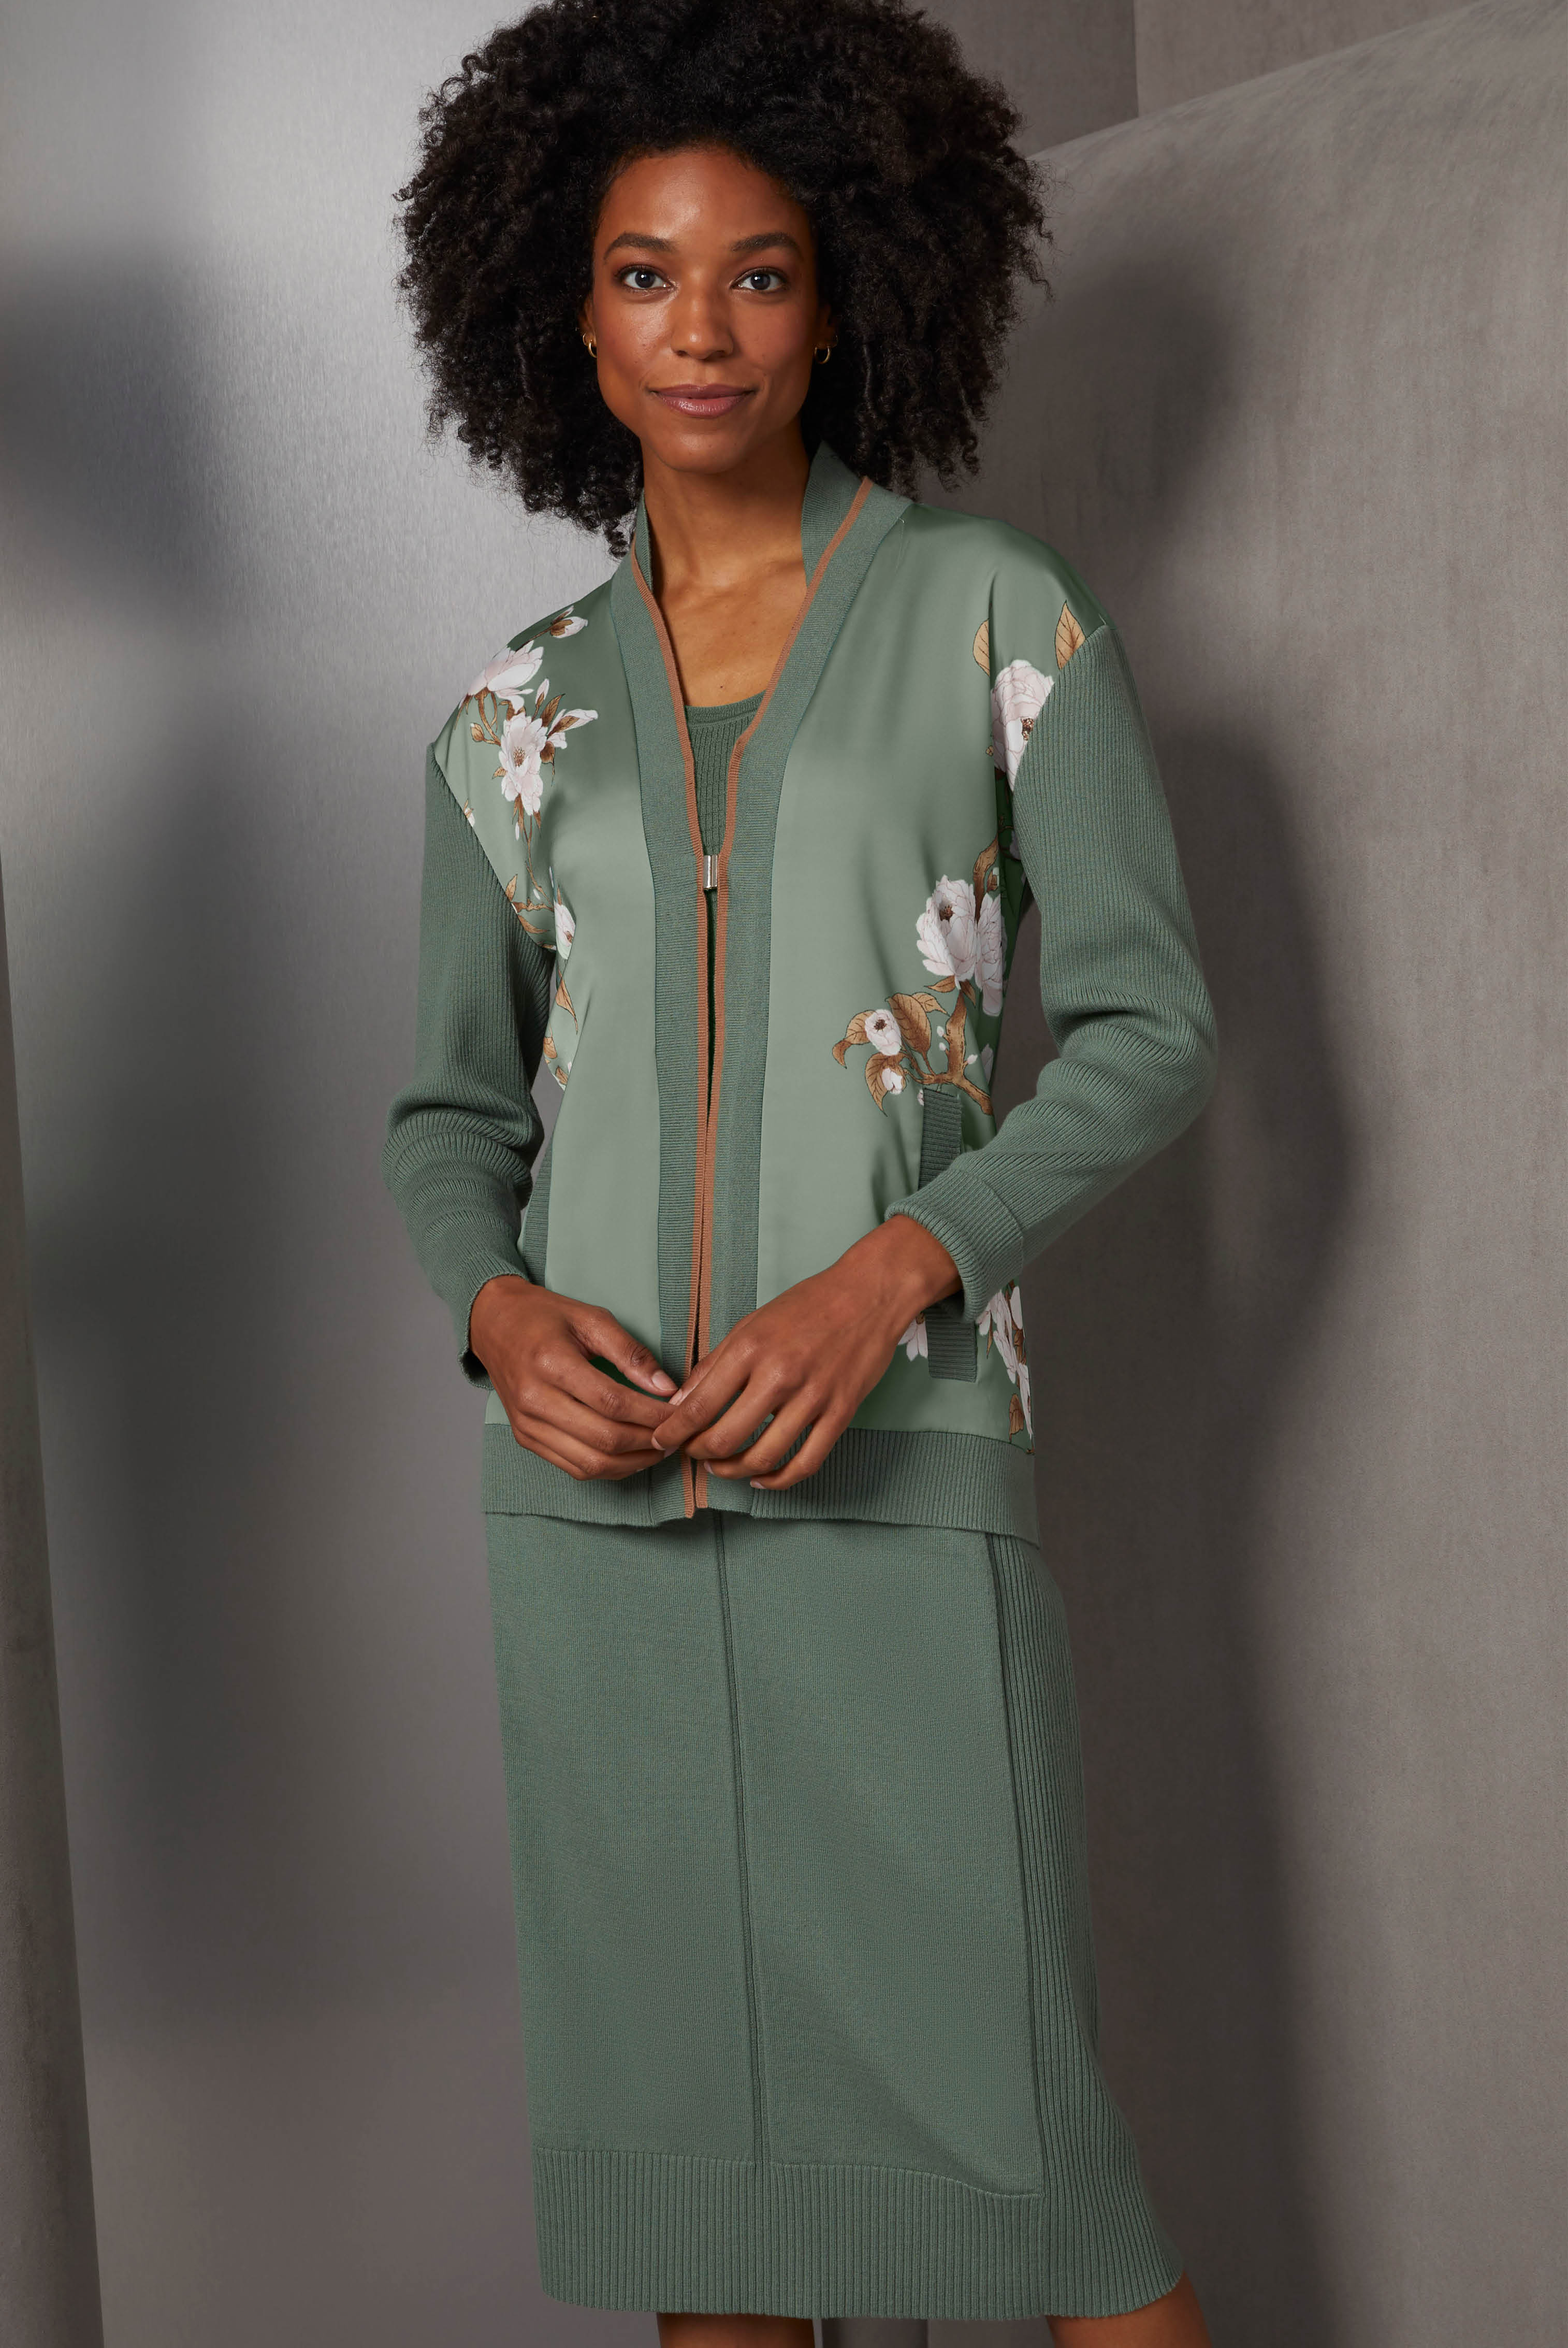 Muted laurel wreath green adds a note of sophistication to winter dressing. All three pieces feature this green, as well as the soft hand-feel of cashmere.